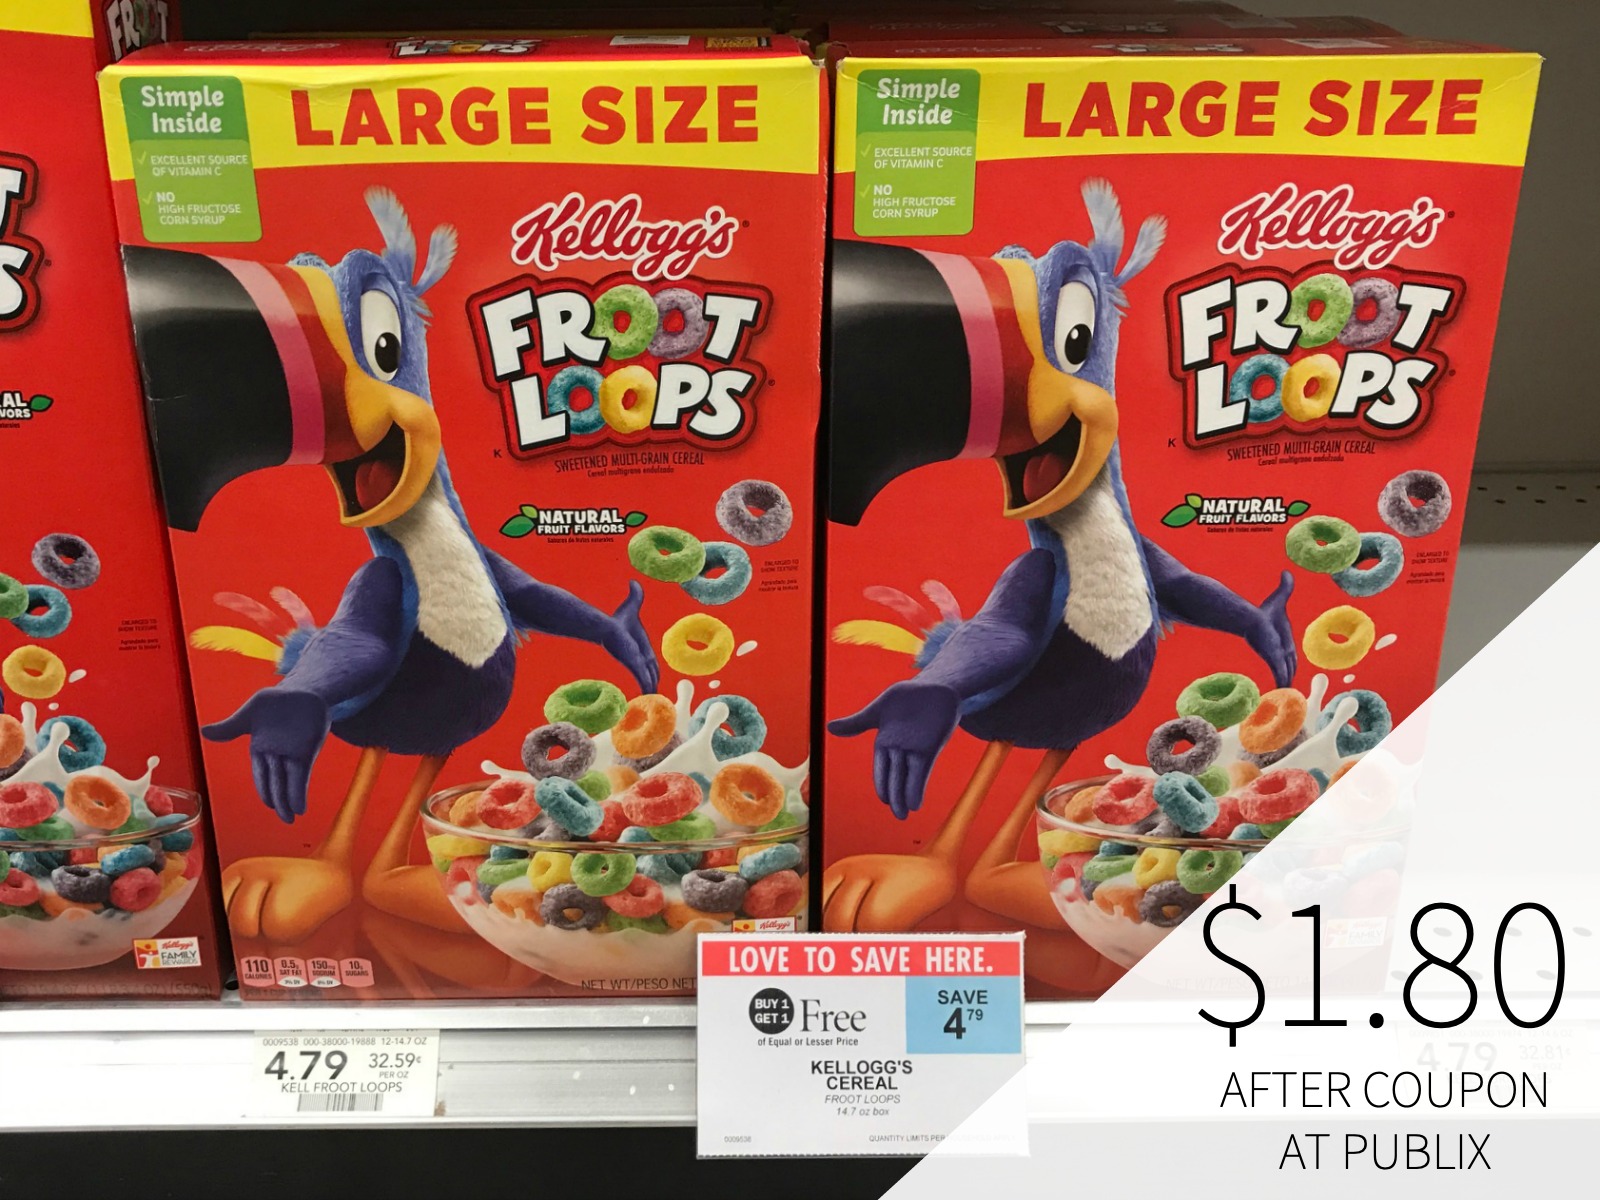 Stock Up On Frosted Flakes And Froot Loops During The BOGO Sale At Publix